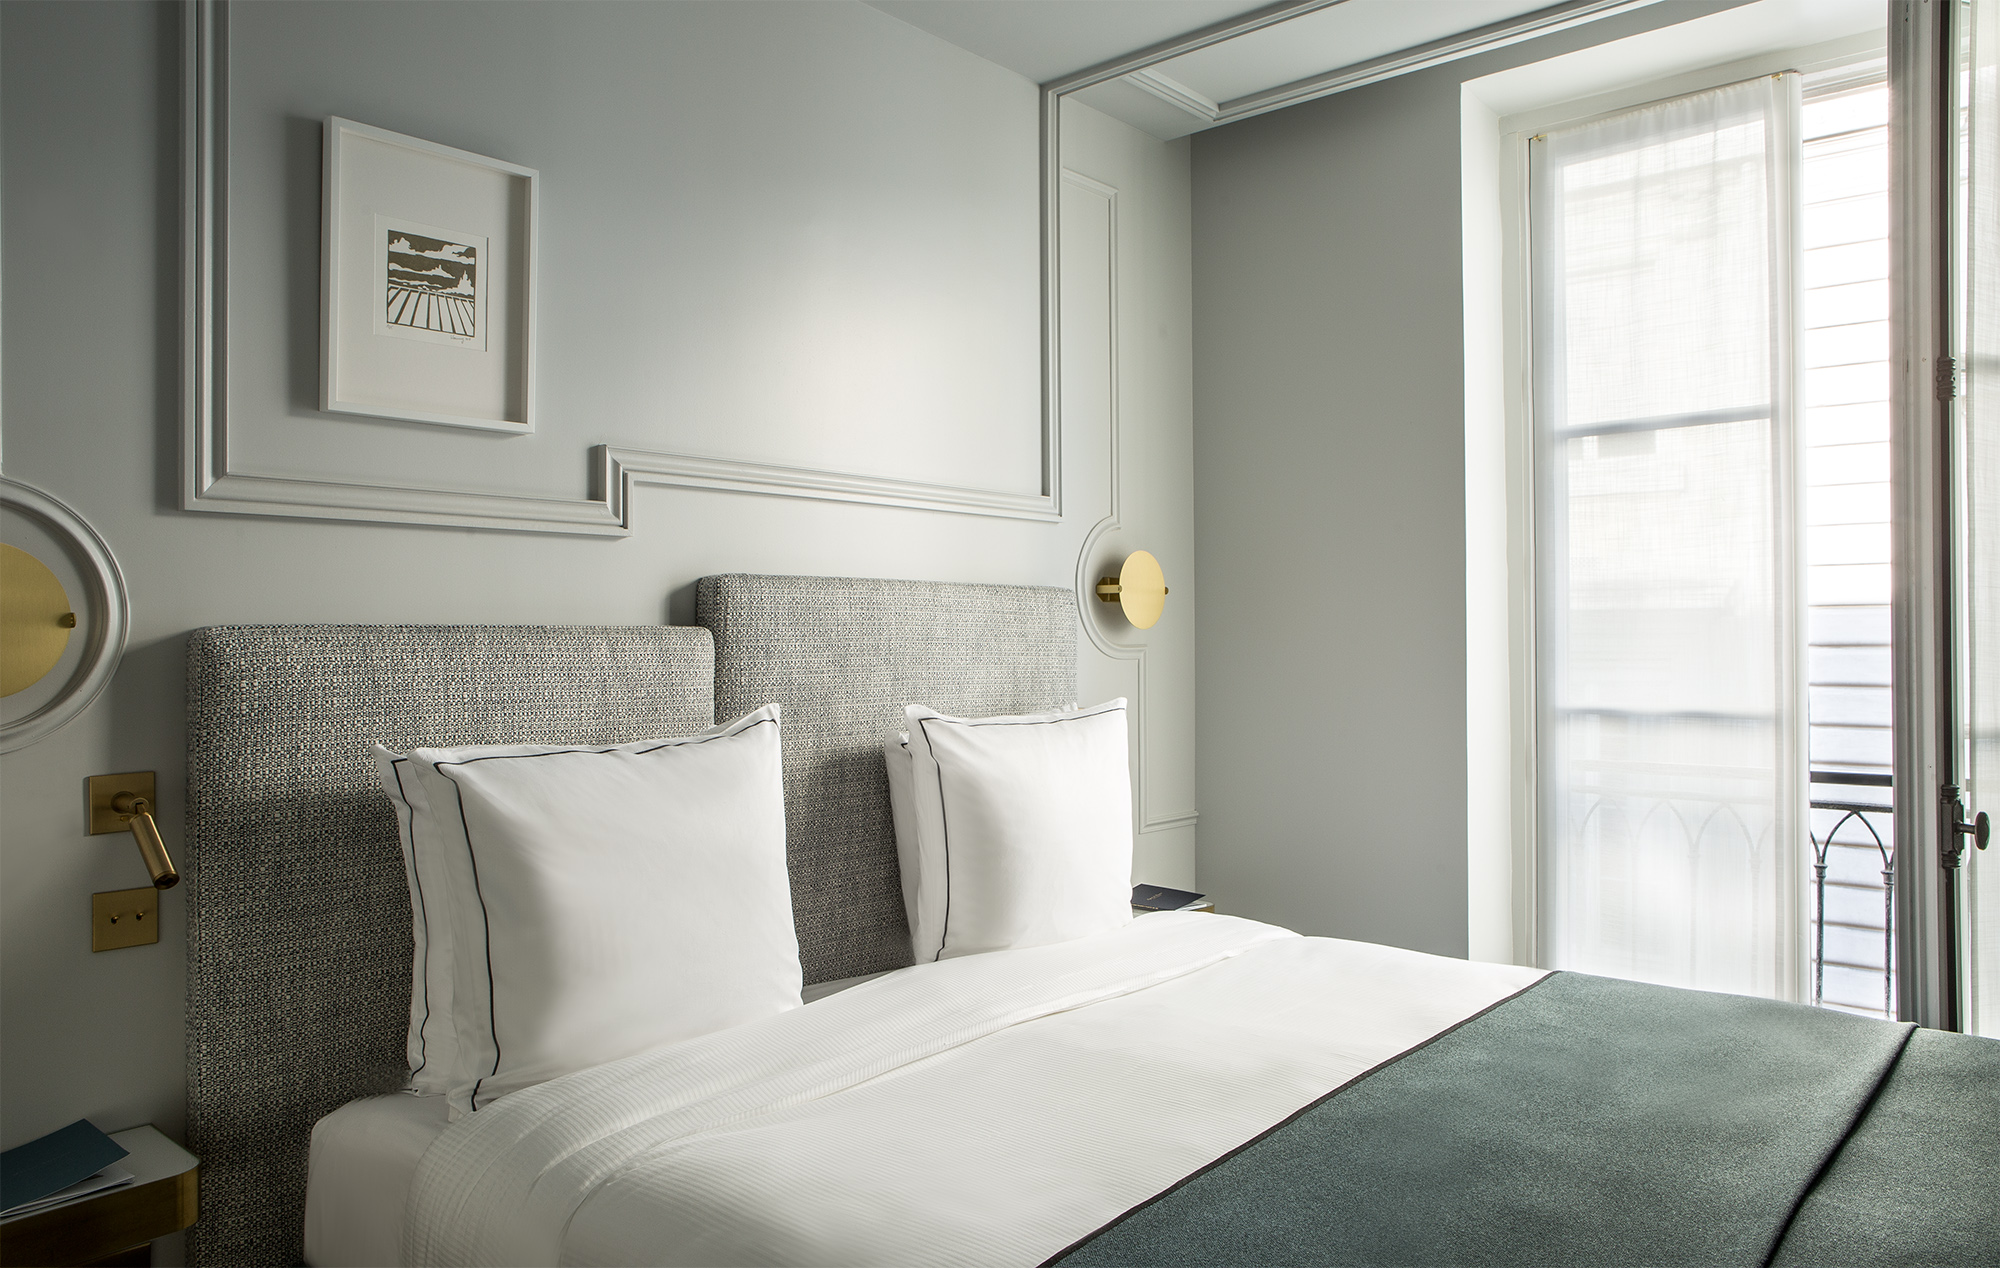 Book a room at the Maison Armance, a 4-star boutique hotel in the 